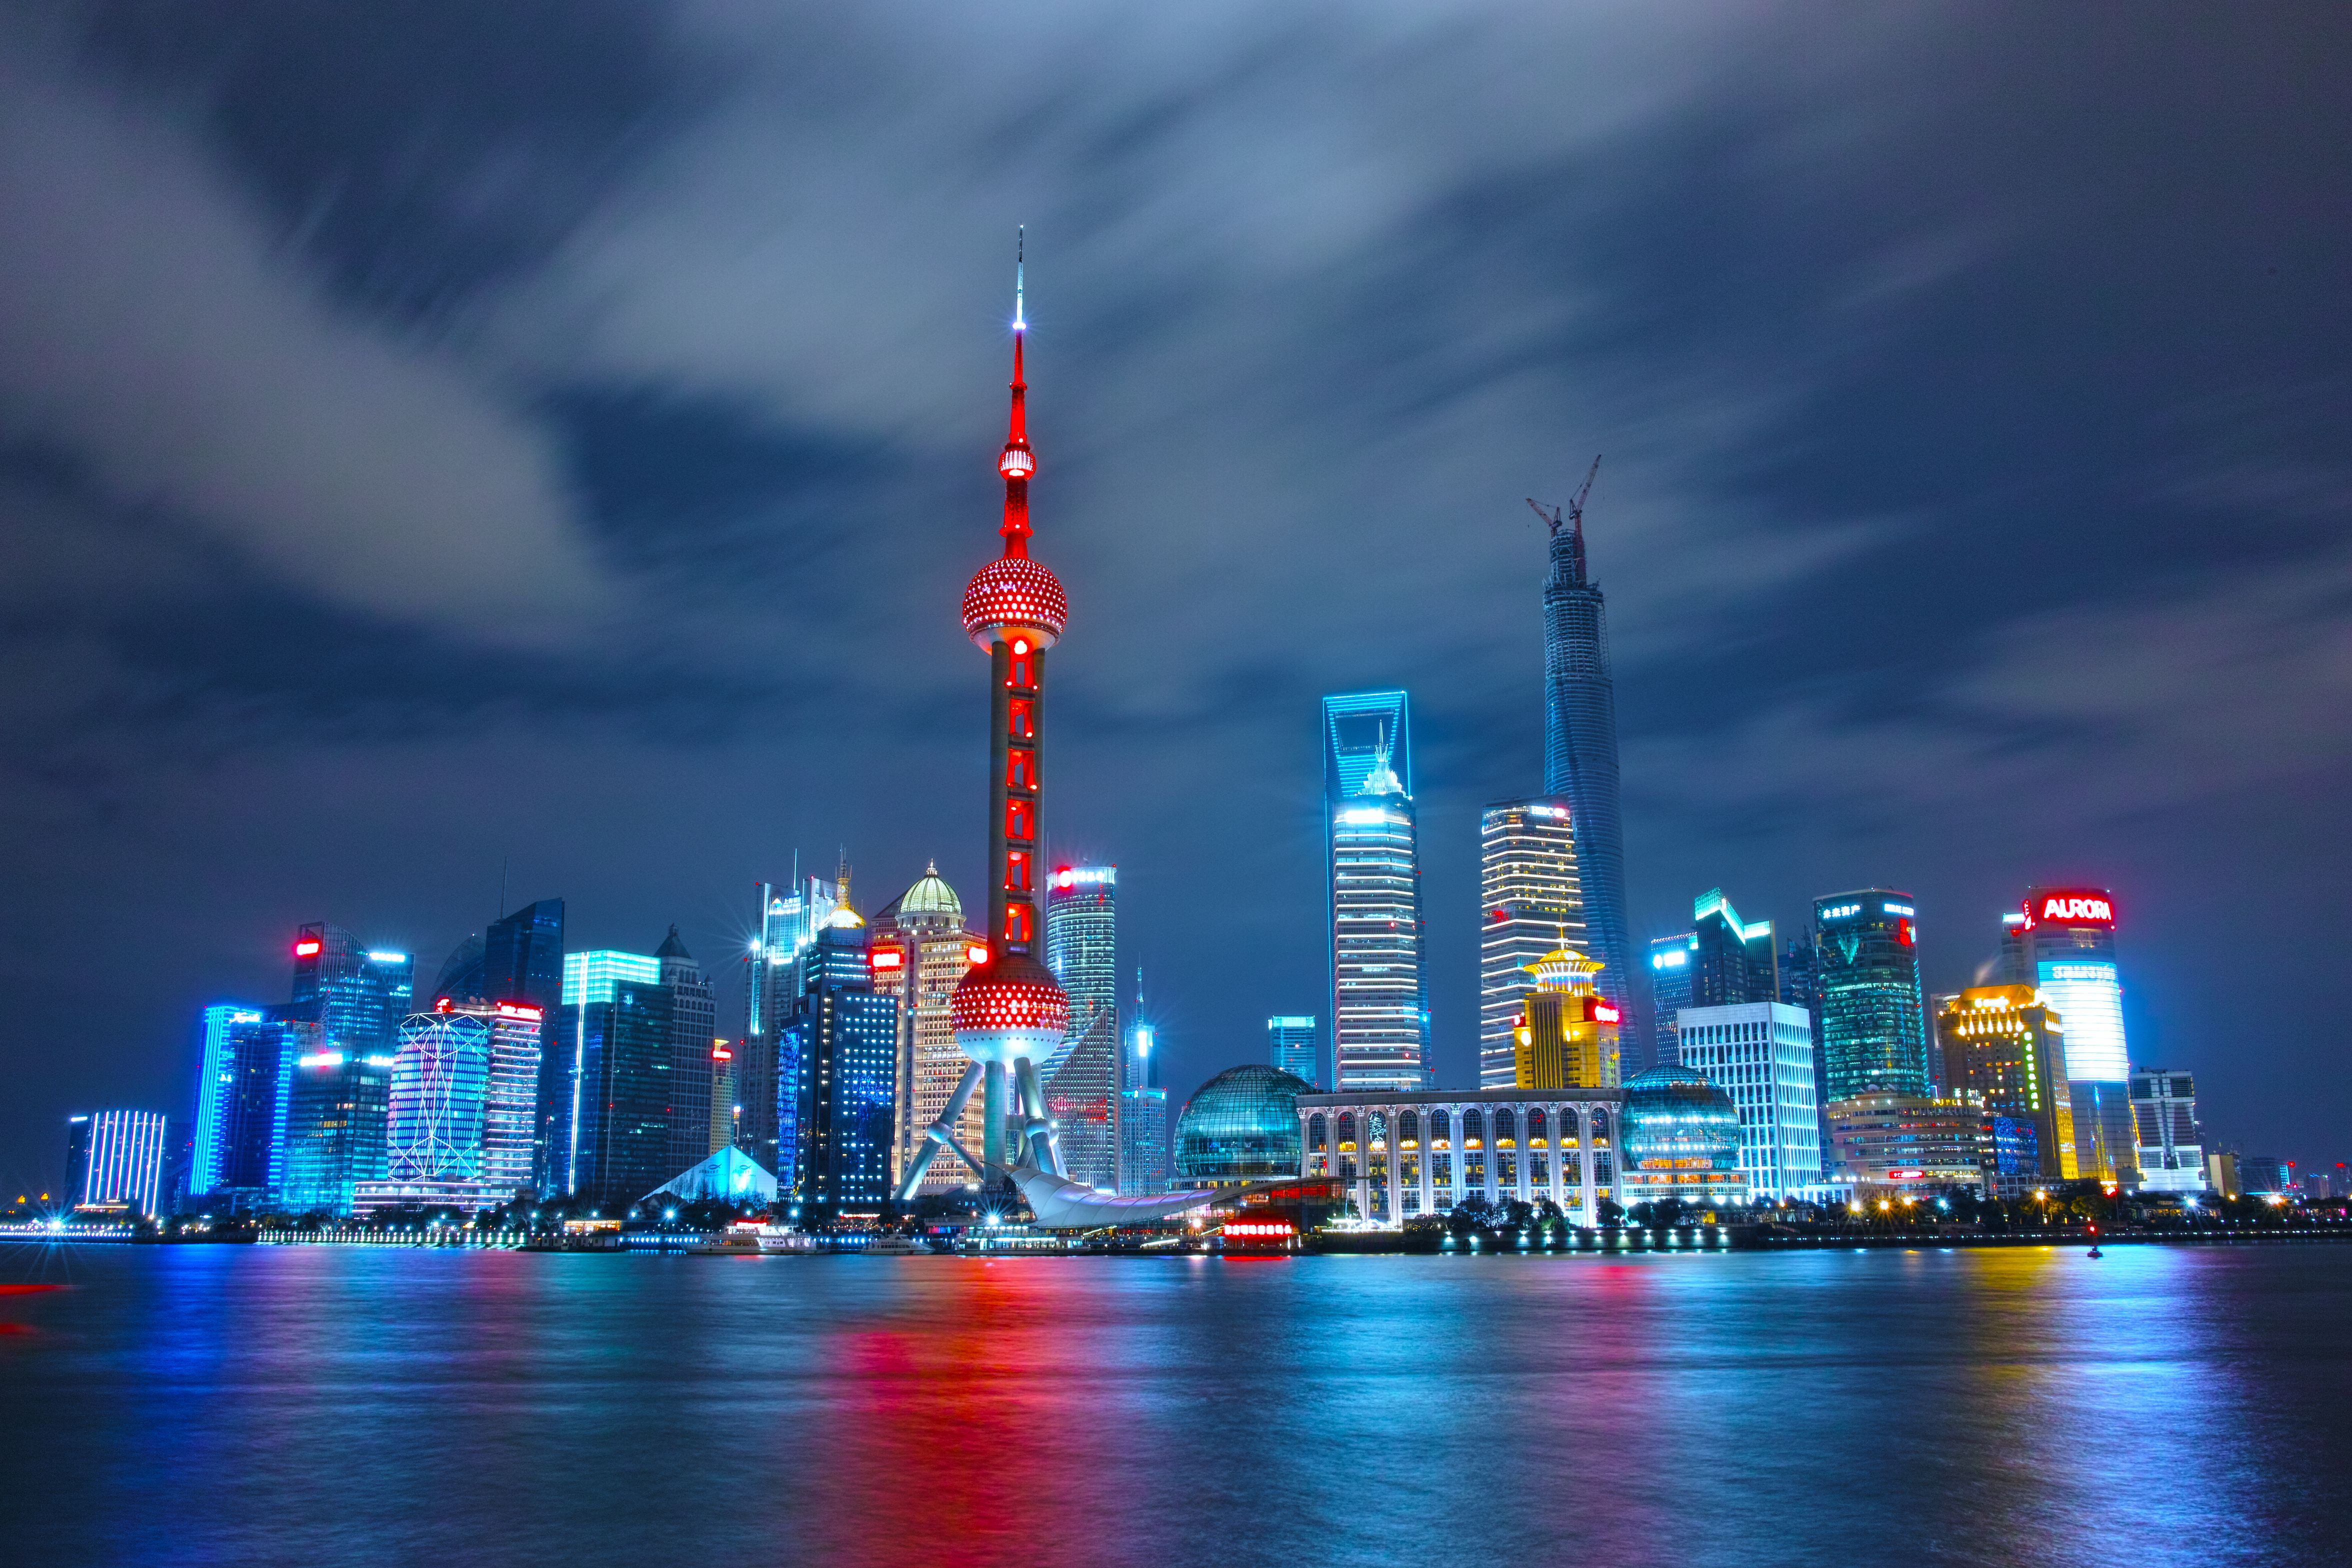 Beautiful Shanghai Picture. Download Free Image